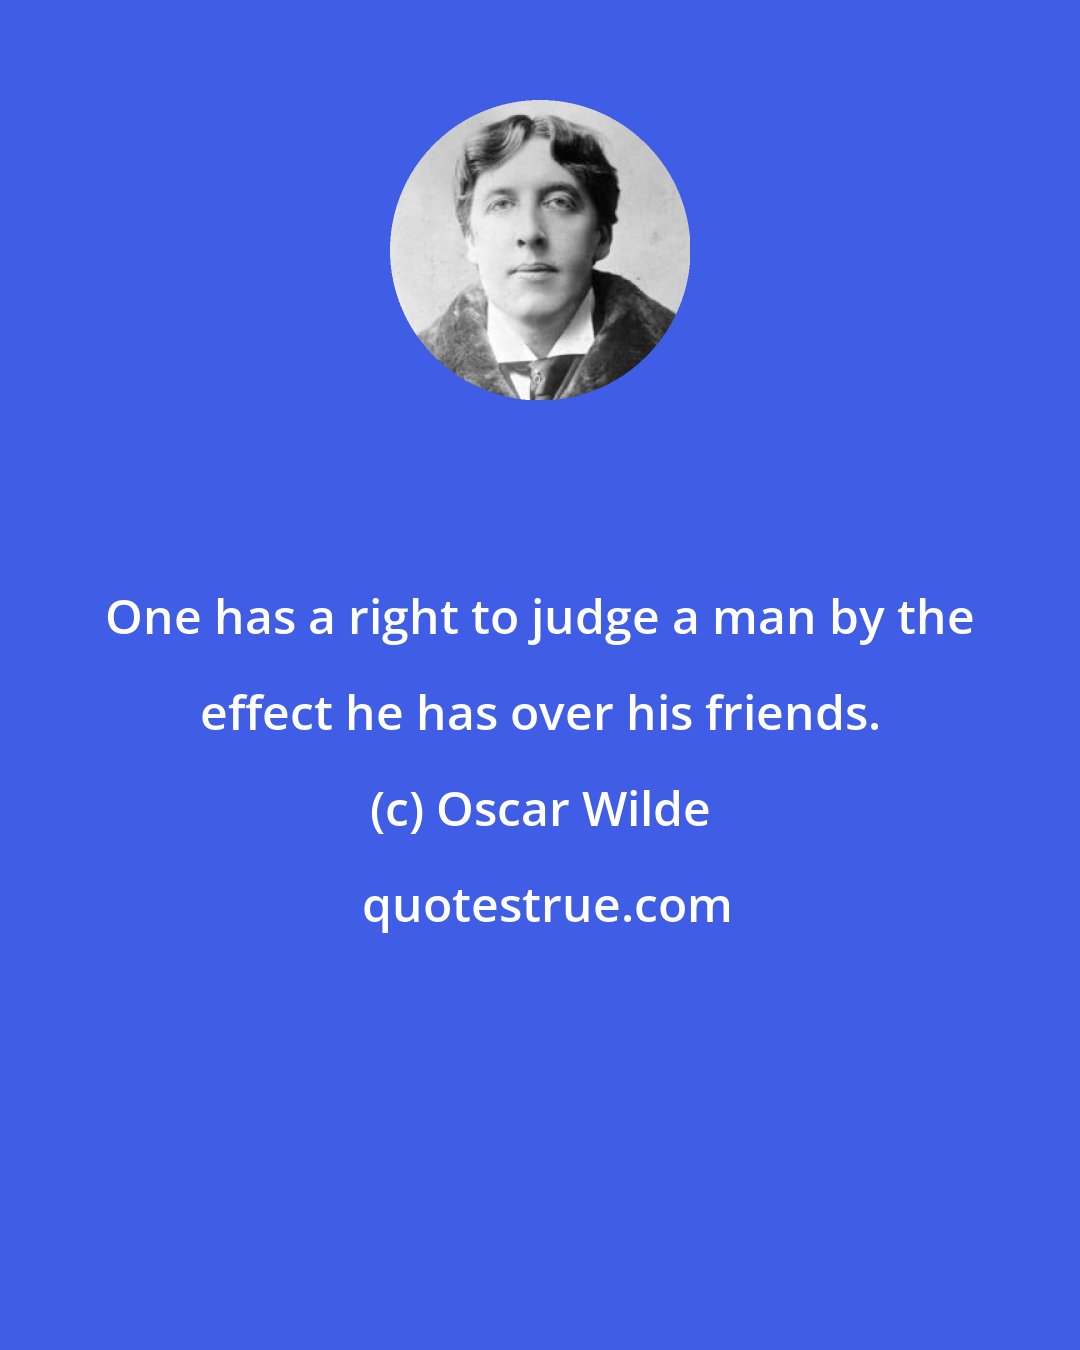 Oscar Wilde: One has a right to judge a man by the effect he has over his friends.